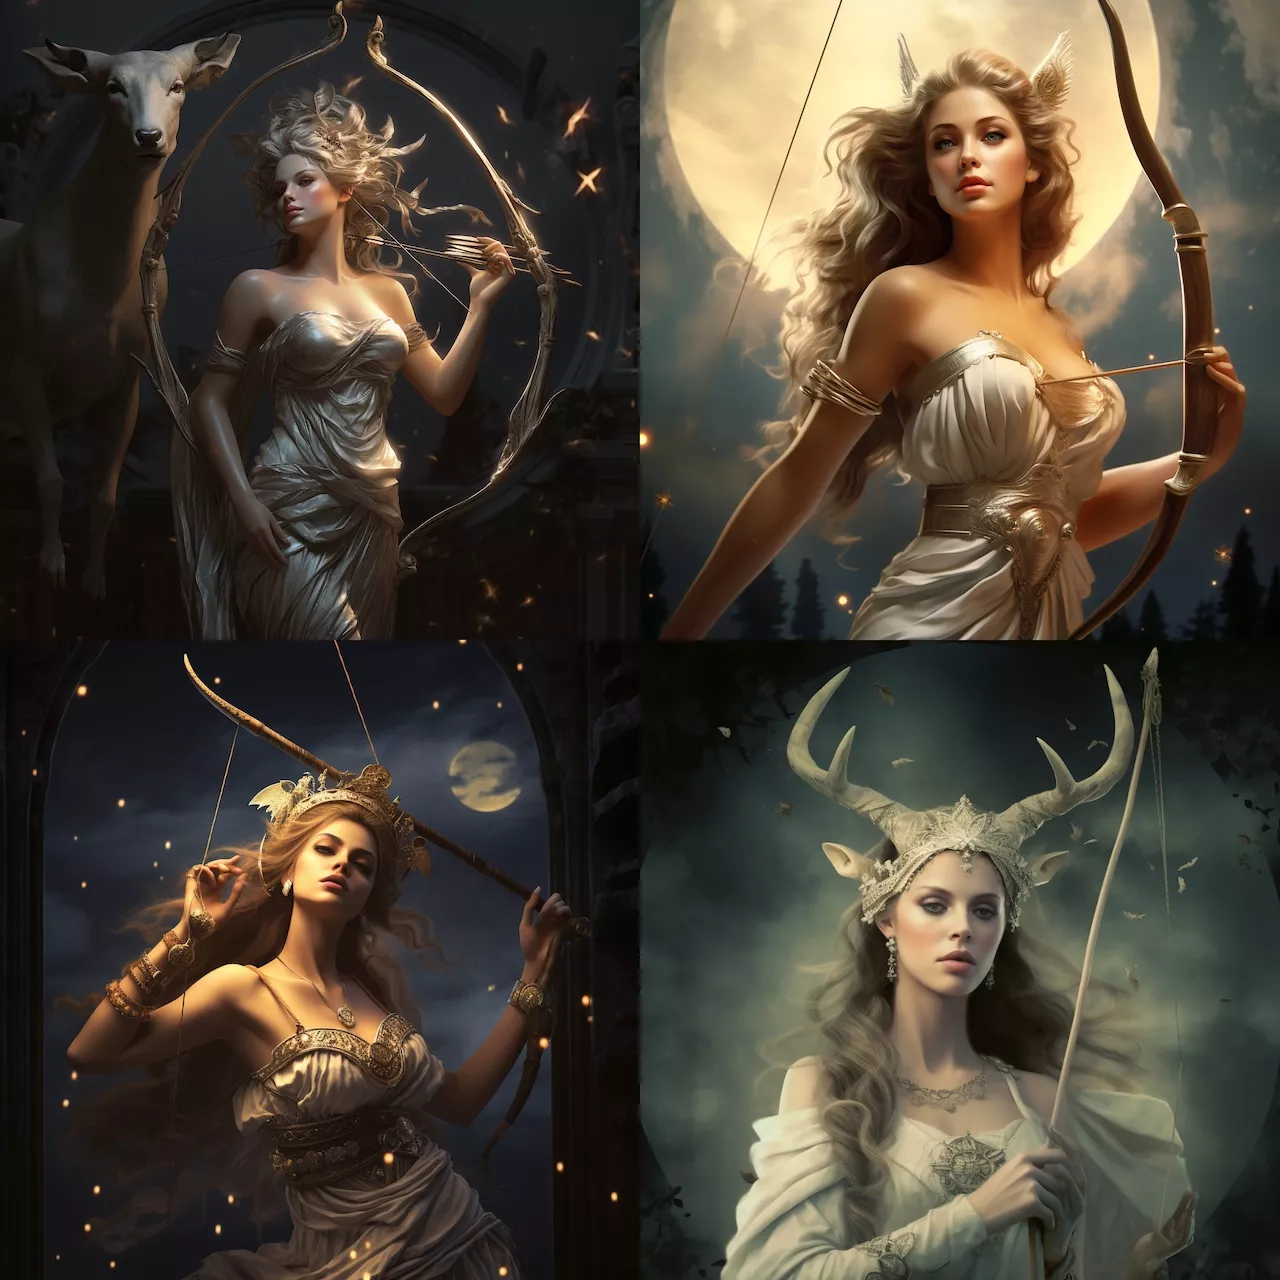 Diana: The Goddess of the Moon, Hunt, and Wild Animals hero image